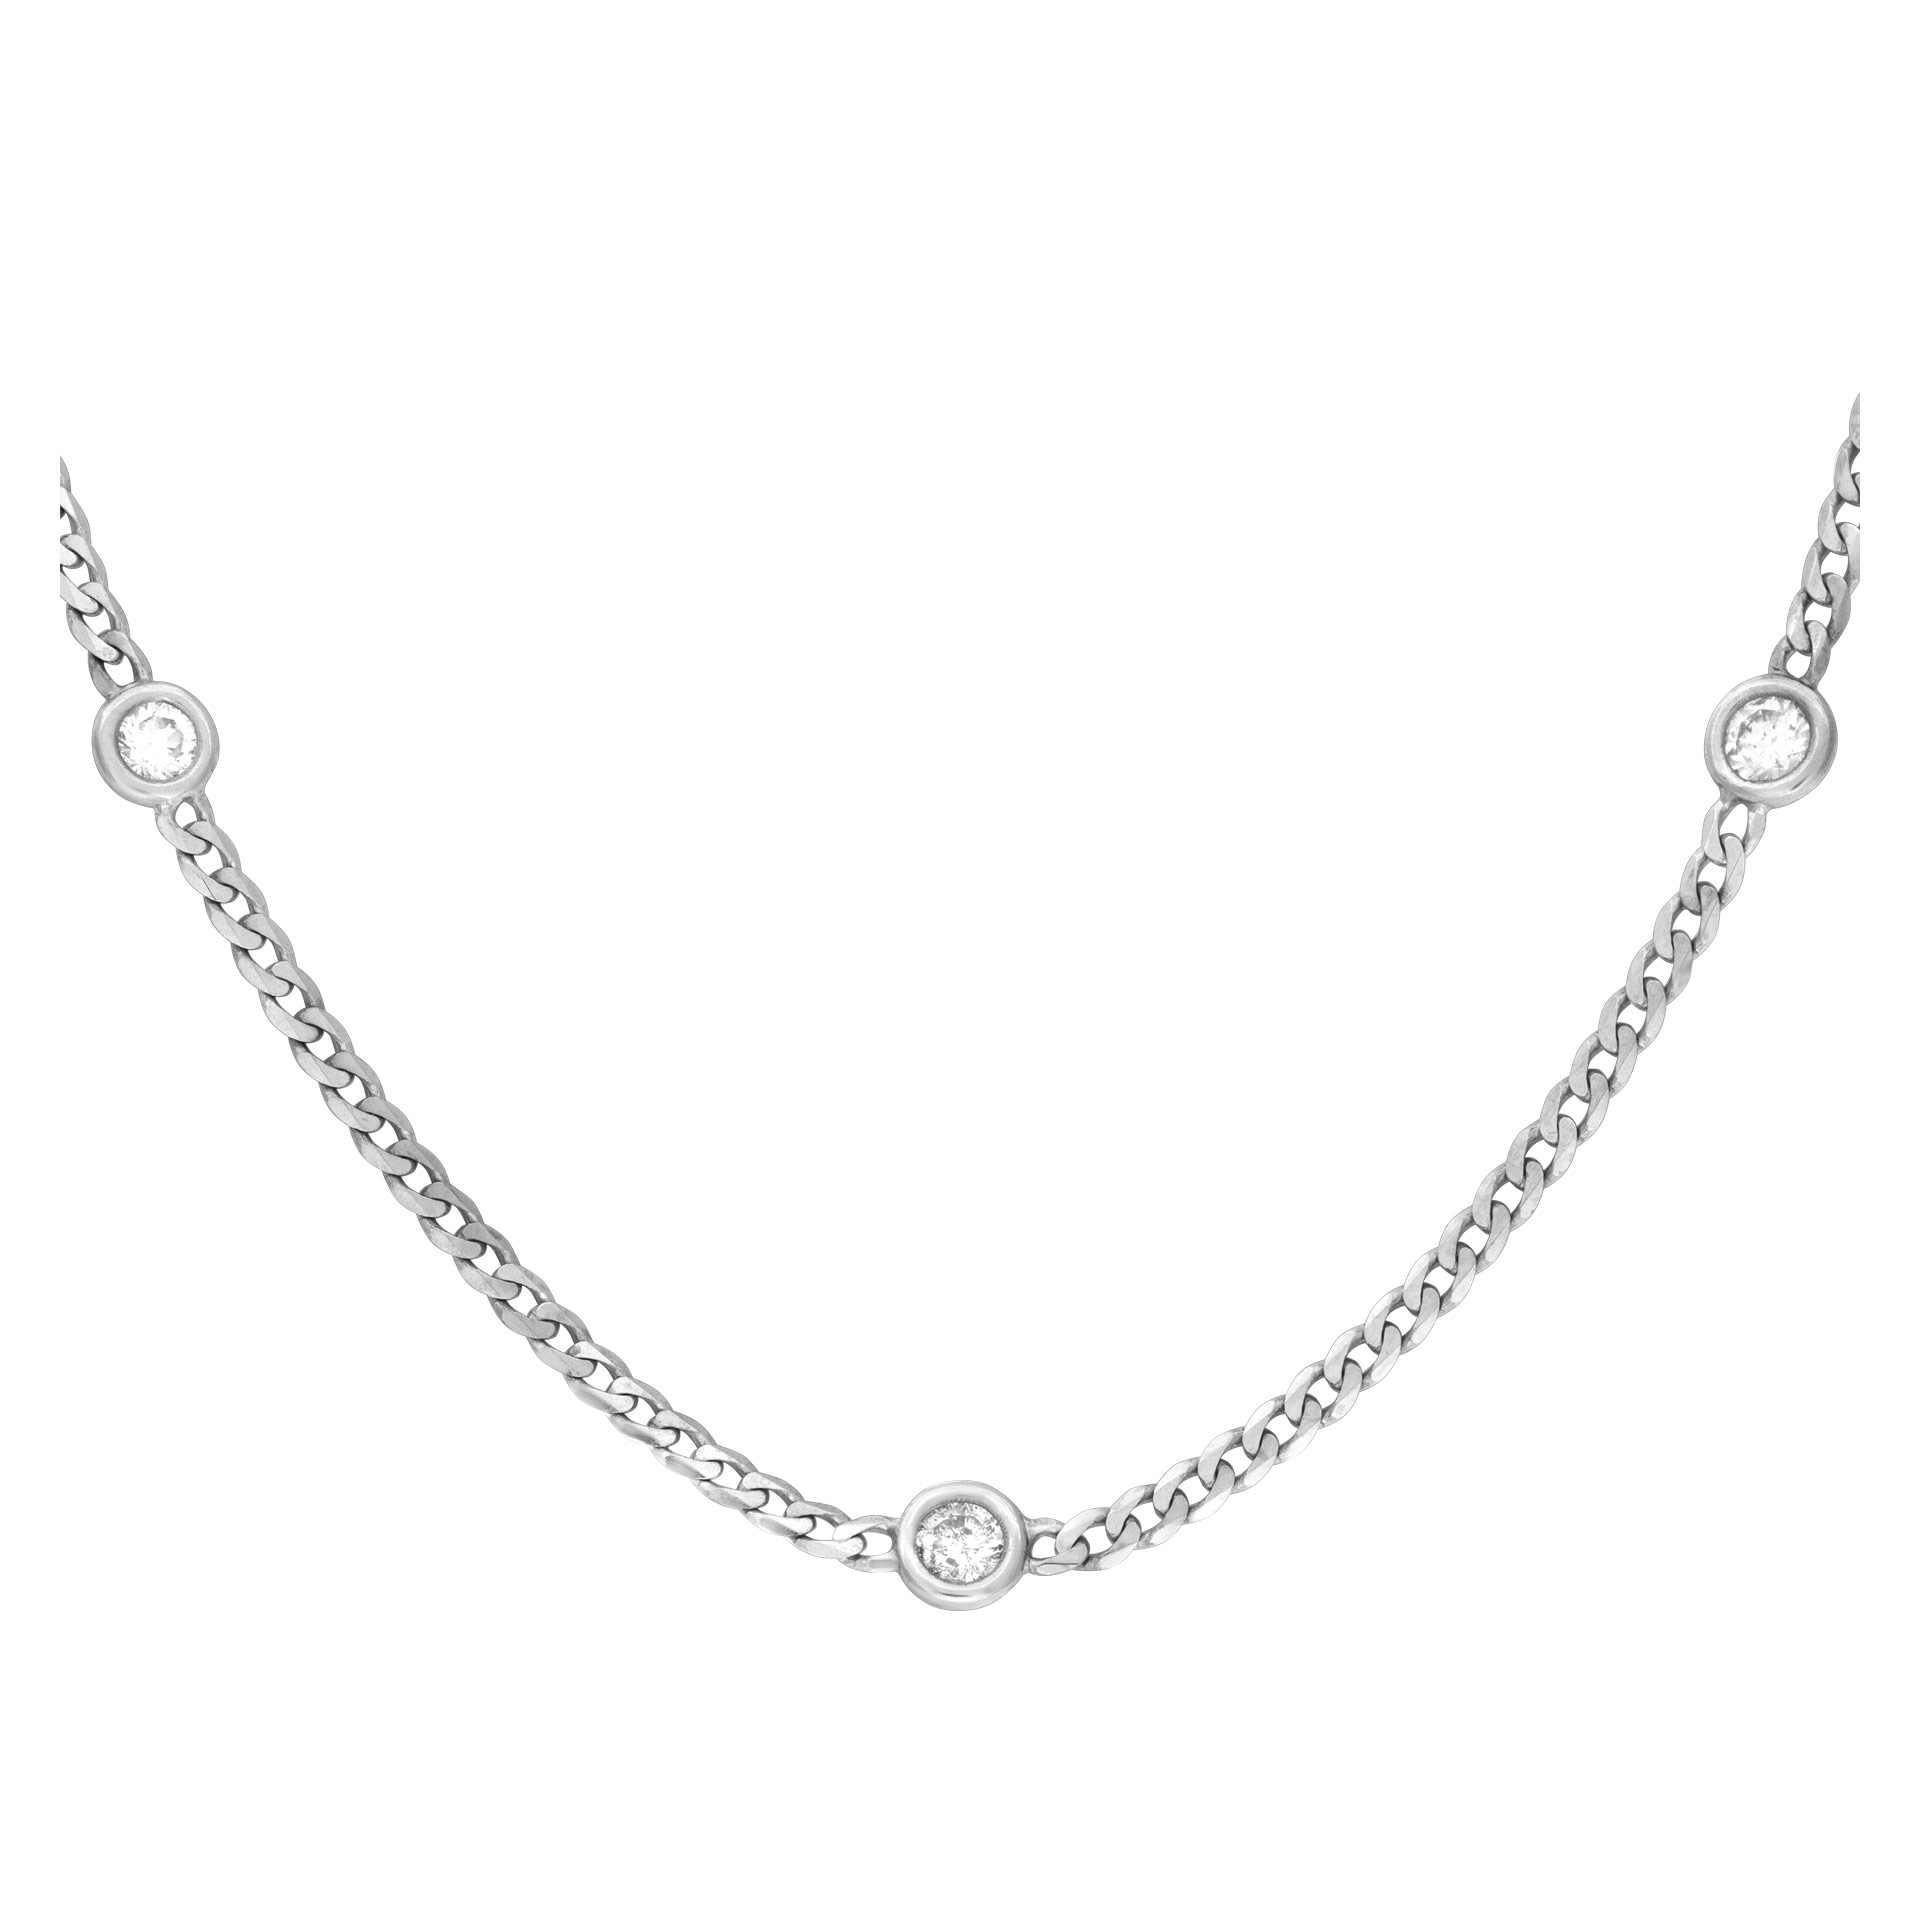 "Diamonds by the Yard" chain/necklace in 14k white gold. With 15 bezeled round brilliant cut diamonds, total approx. weight:1.66 carat. 24". image 2